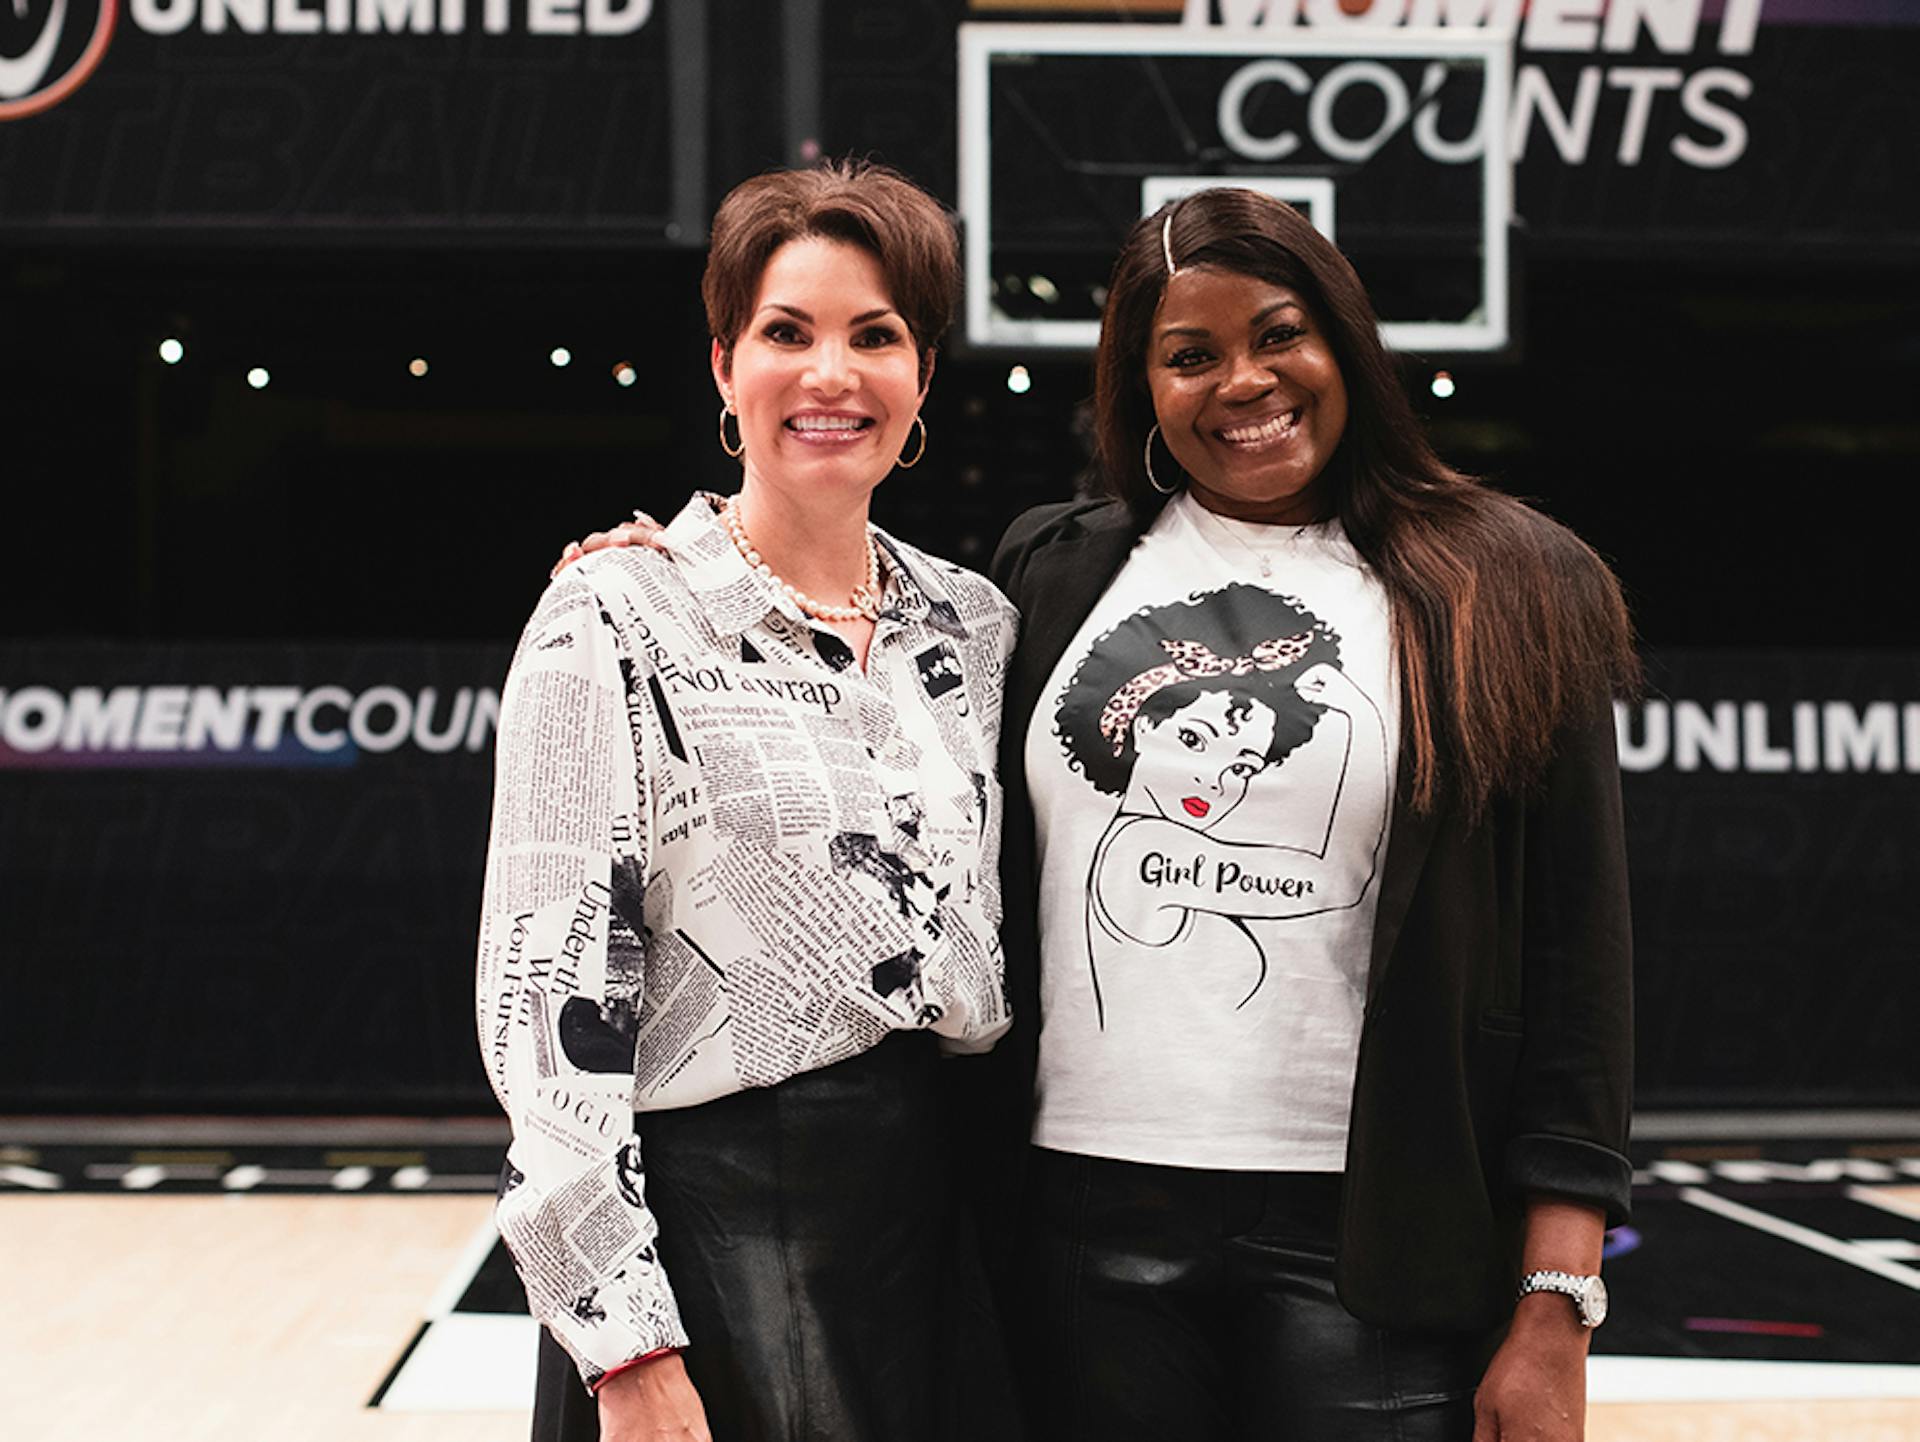 The WNBA Star Turned Team Owner Who Found Her Voice